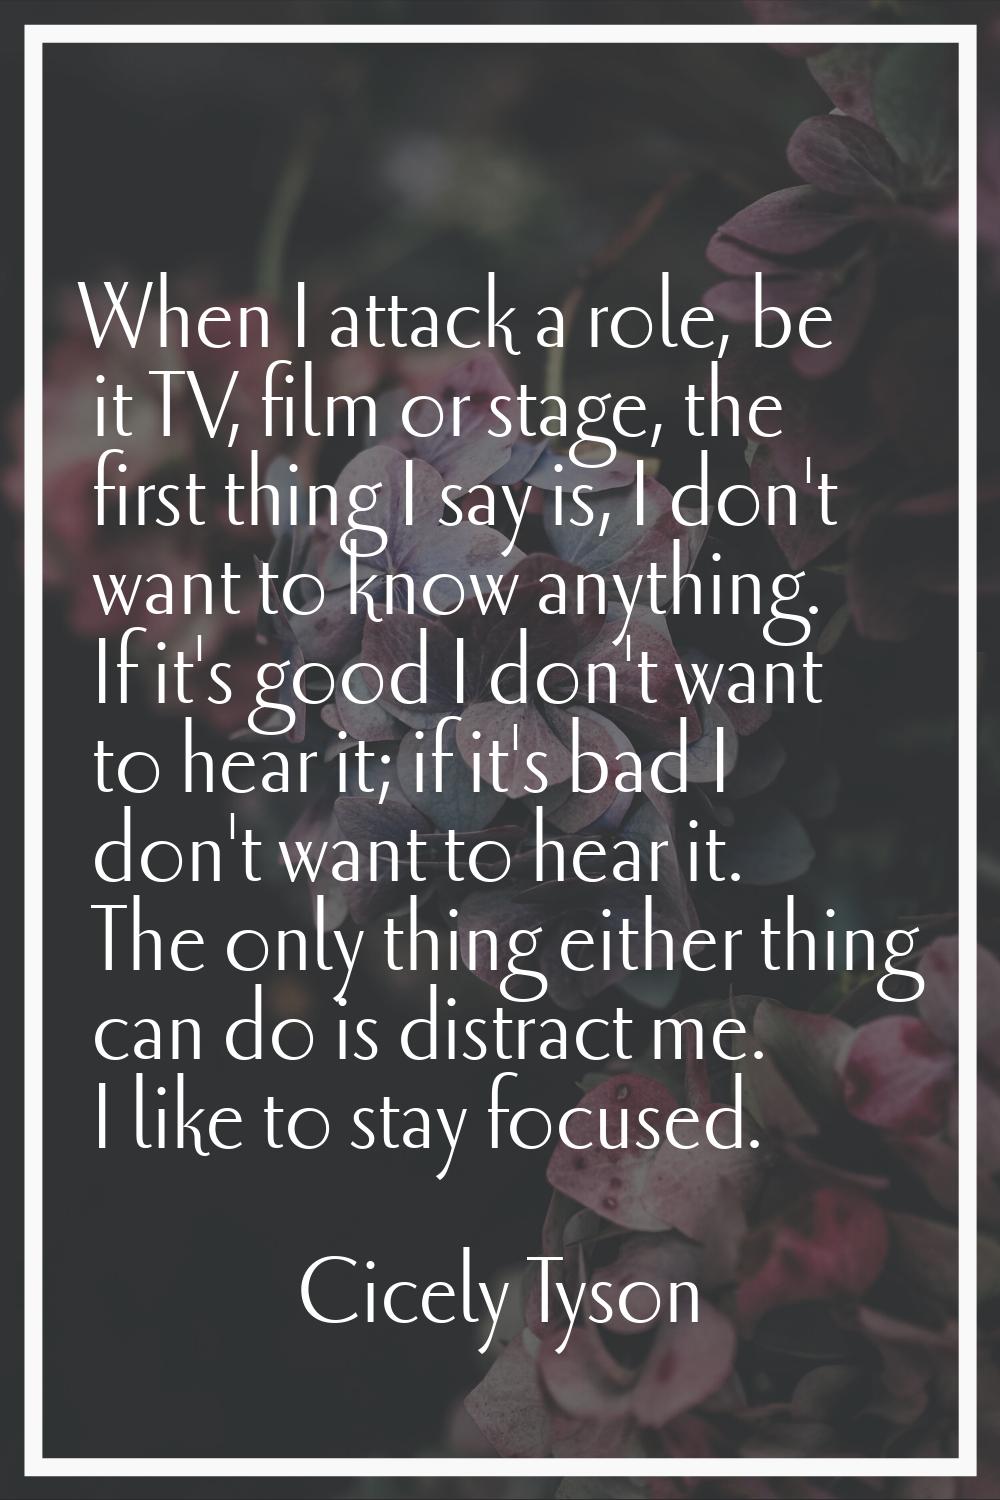 When I attack a role, be it TV, film or stage, the first thing I say is, I don't want to know anyth